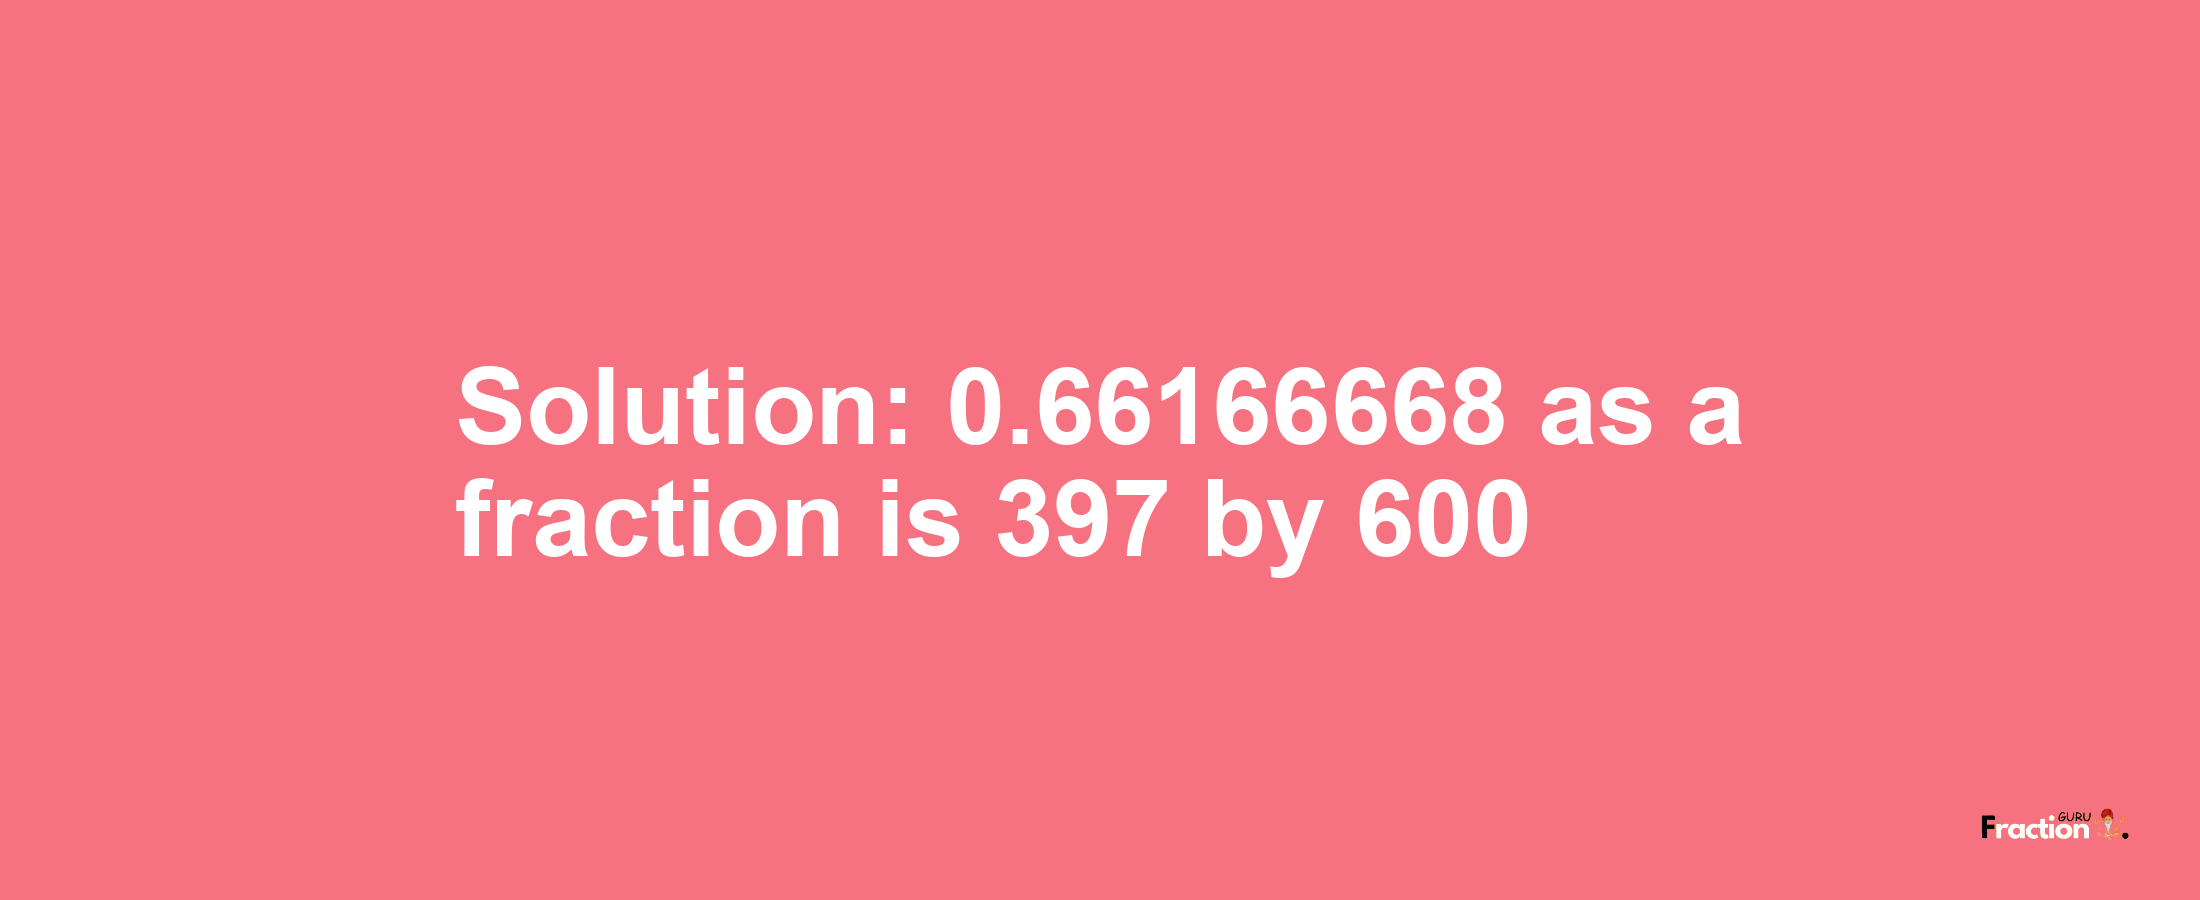 Solution:0.66166668 as a fraction is 397/600